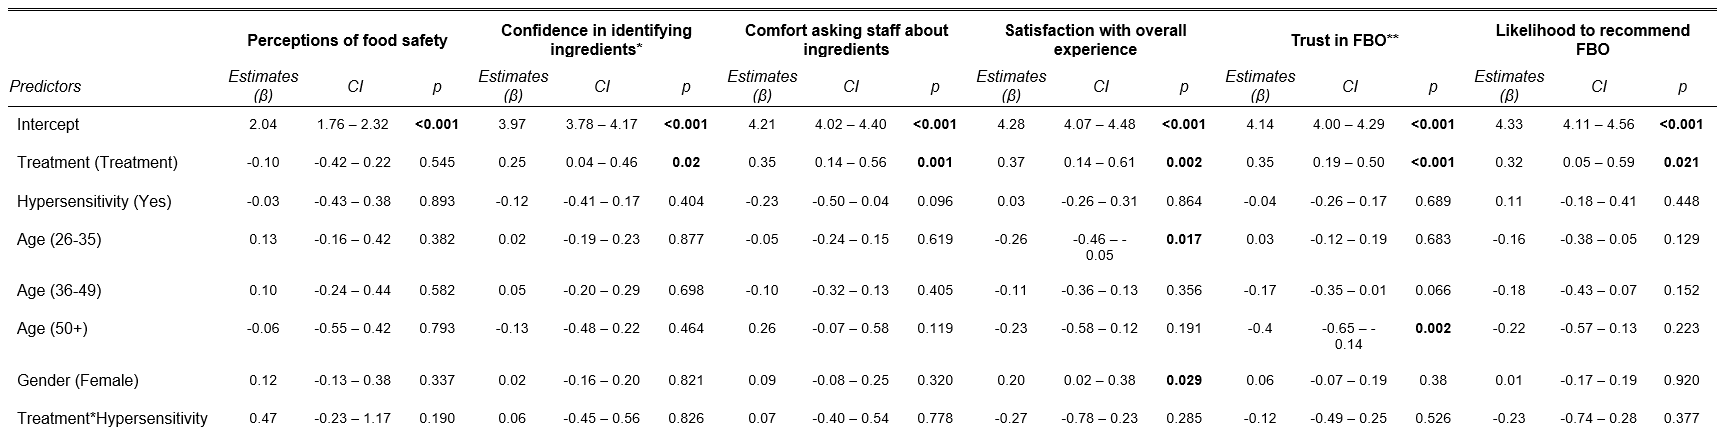 Predictors are shown in the first column. Perceptions of food safety is a common header for the second to the fourth columns. Estimates, confidence interval and p-value for perception are shown in the second, third and fourth column respectively. Confidence in identifying ingredients is a common header for the fifth to the seventh columns. Estimates, confidence interval and p-value for confidence are shown in the fifth, sixth and seventh column respectively. Comfort asking staff about ingredients is a commo